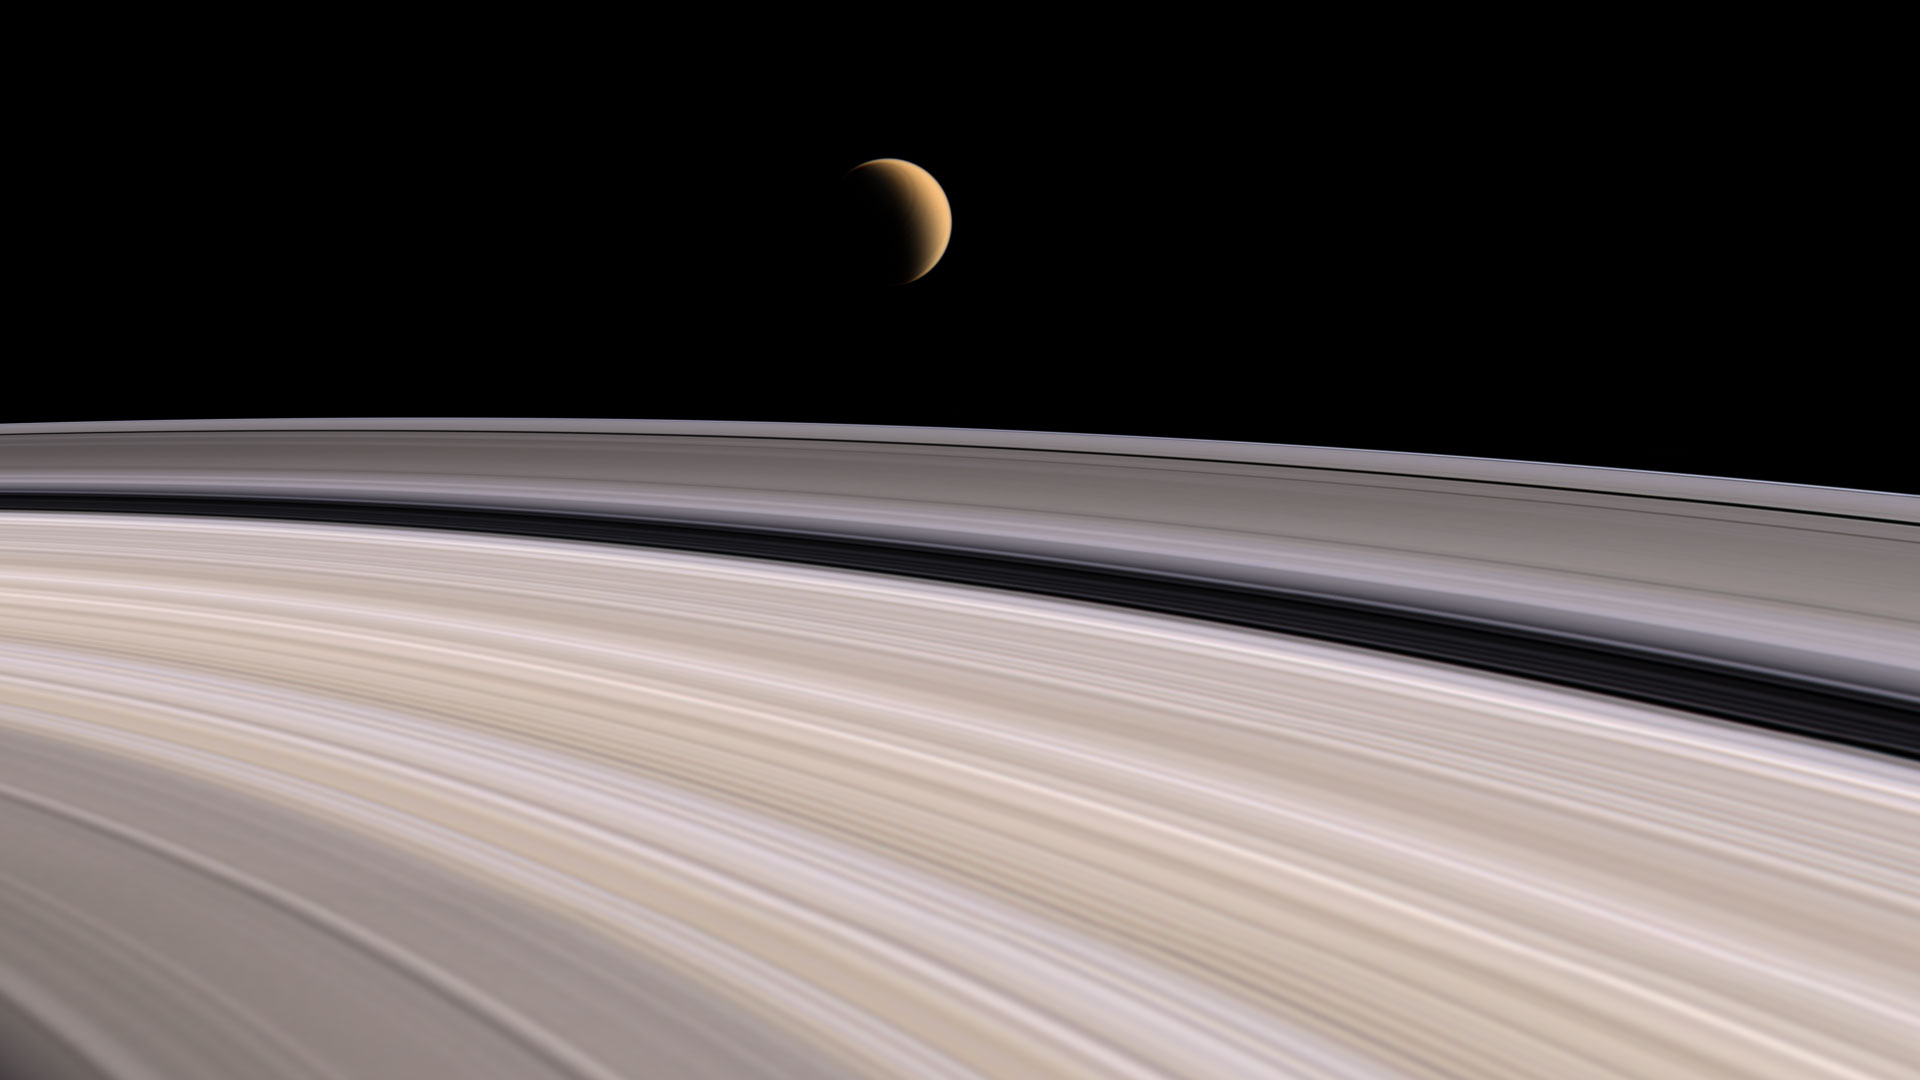 Top Most Magnificent Image Of Saturn Ever Created Charlie White